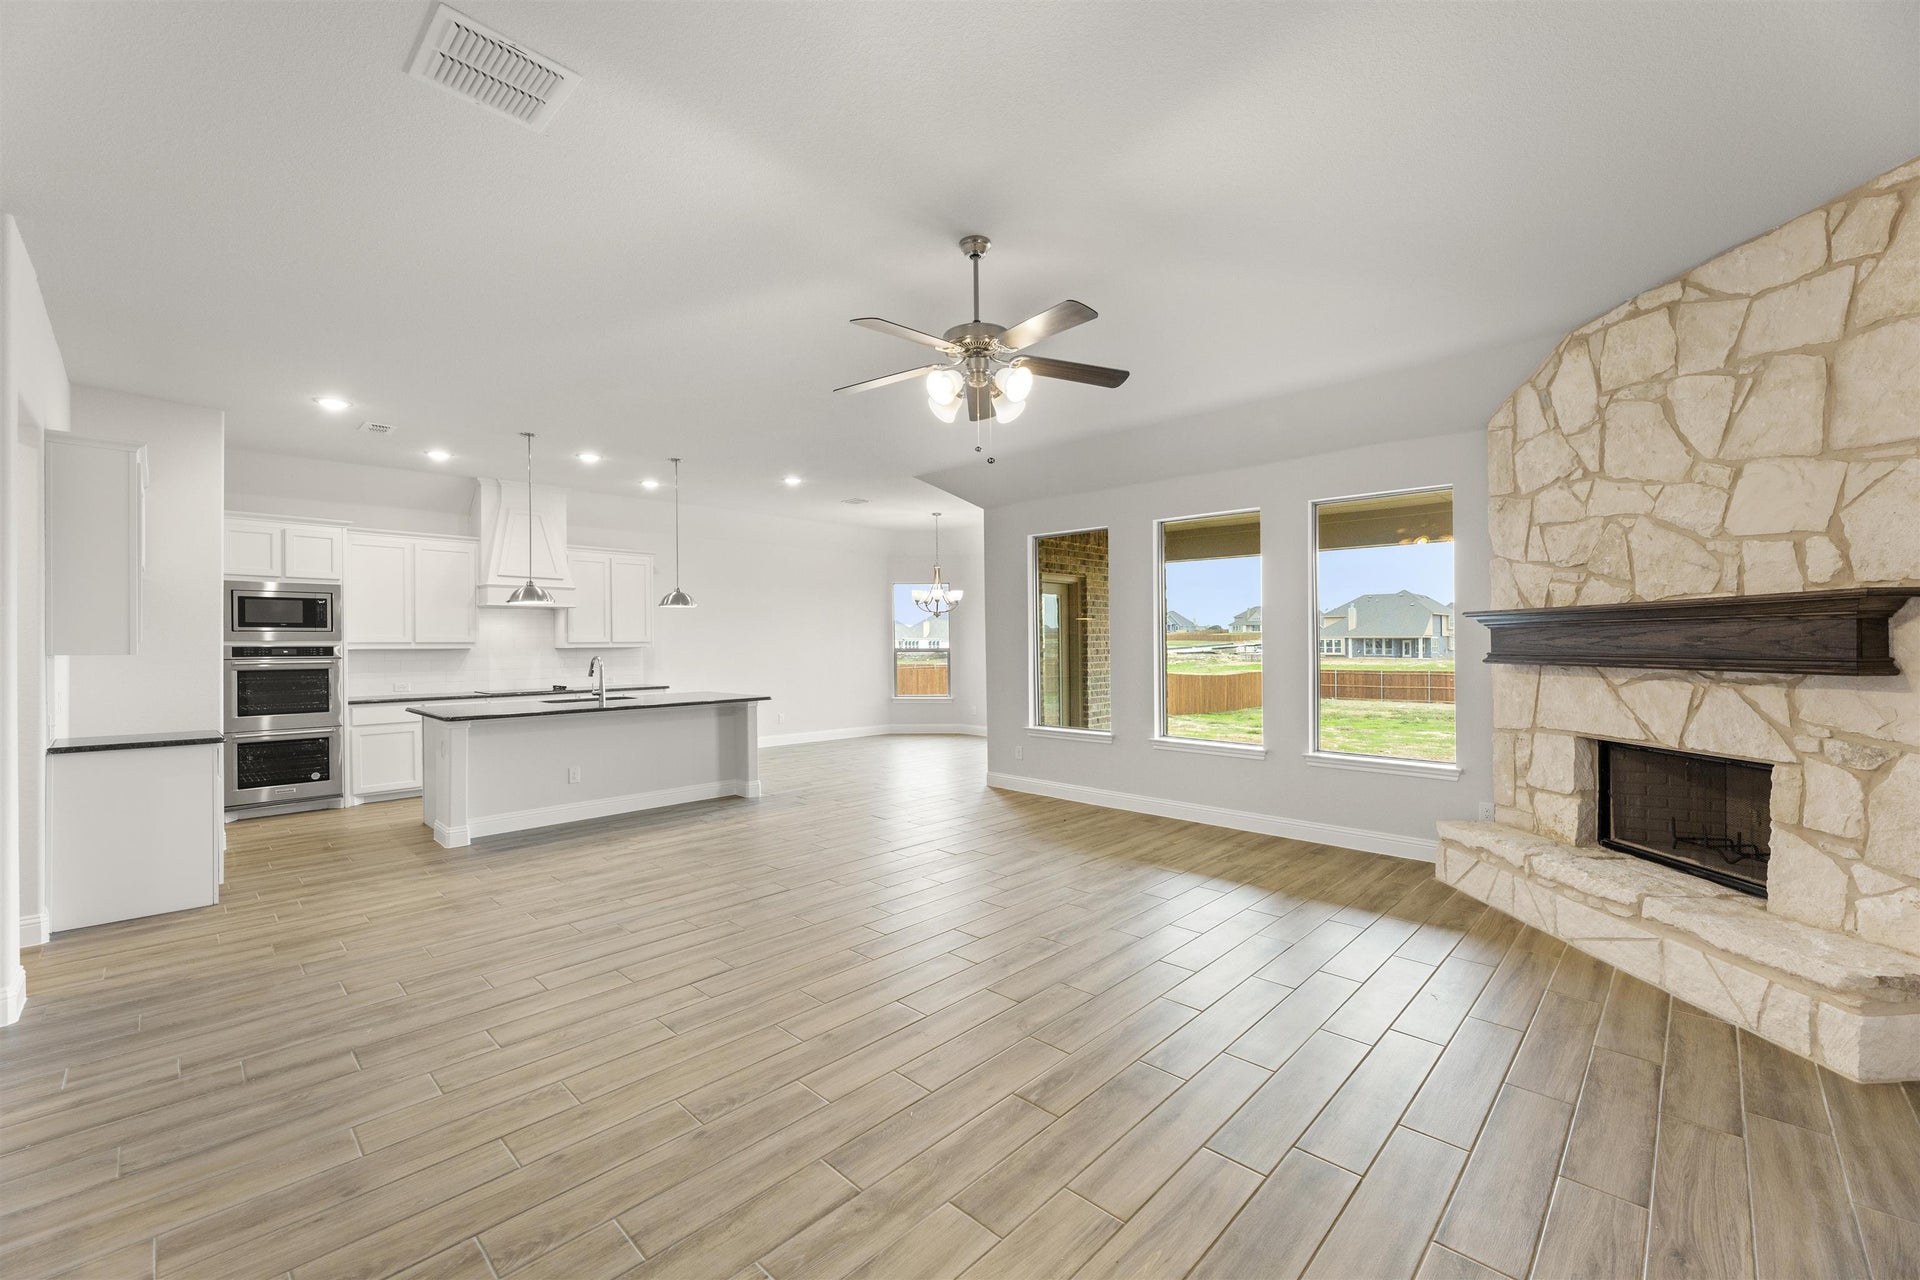 3br New Home in Godley, TX